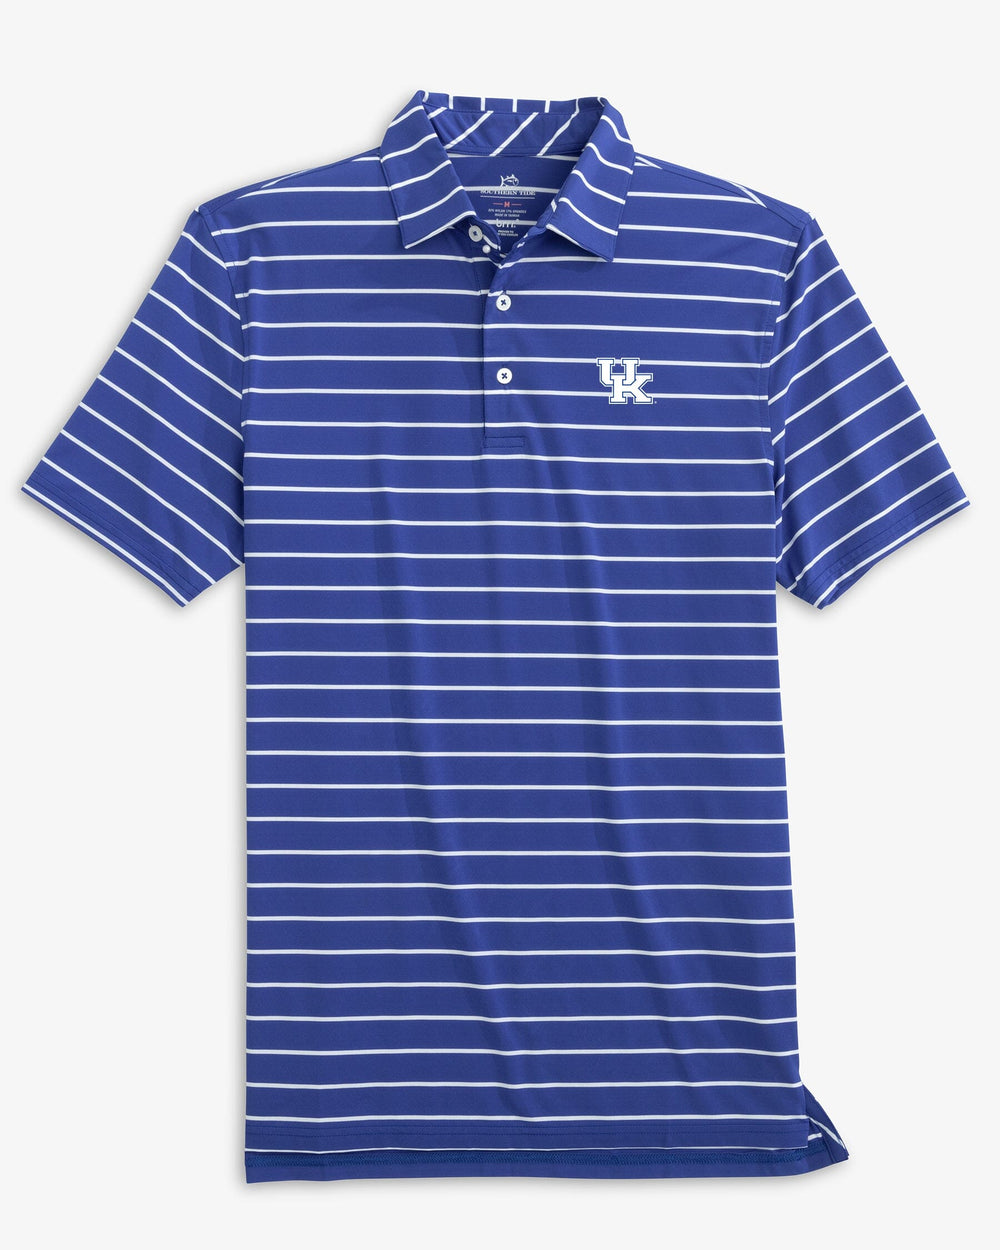 The front view of the Kentucky Wildcats Brreeze Desmond Stripe Performance Polo by Southern Tide - University Blue